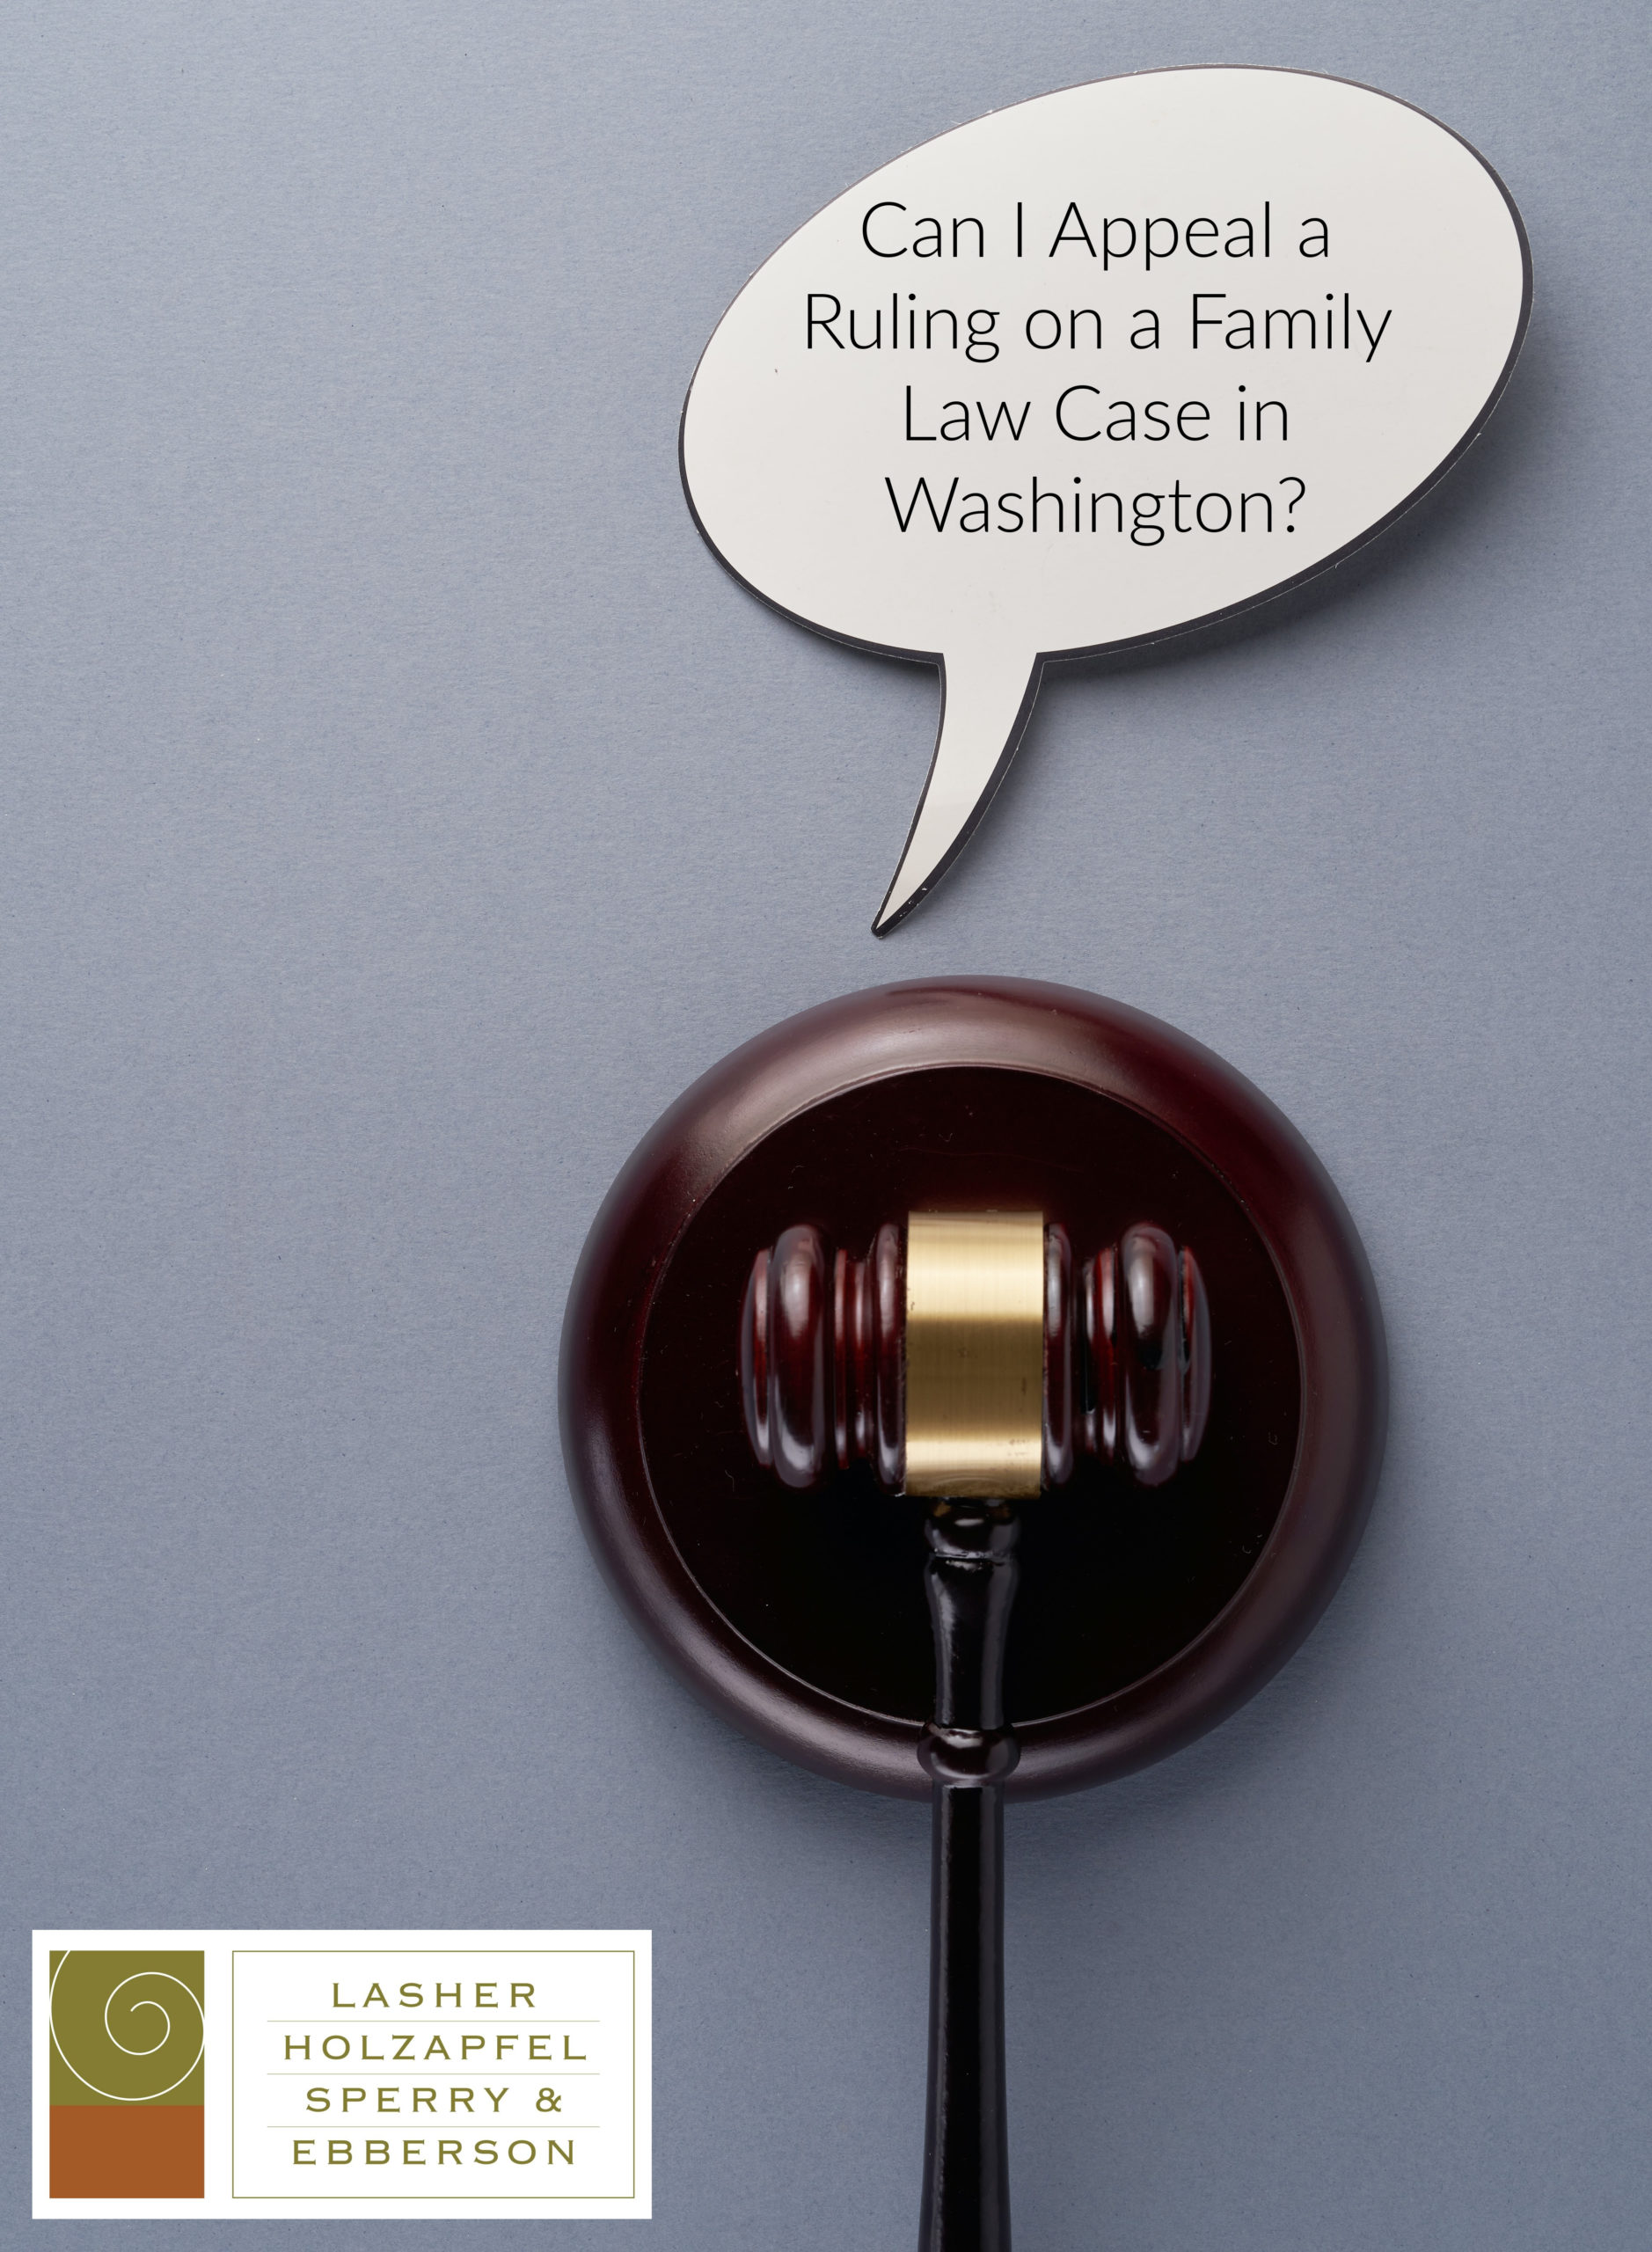 Can I Appeal a Ruling on a Family Law Case in Washington?